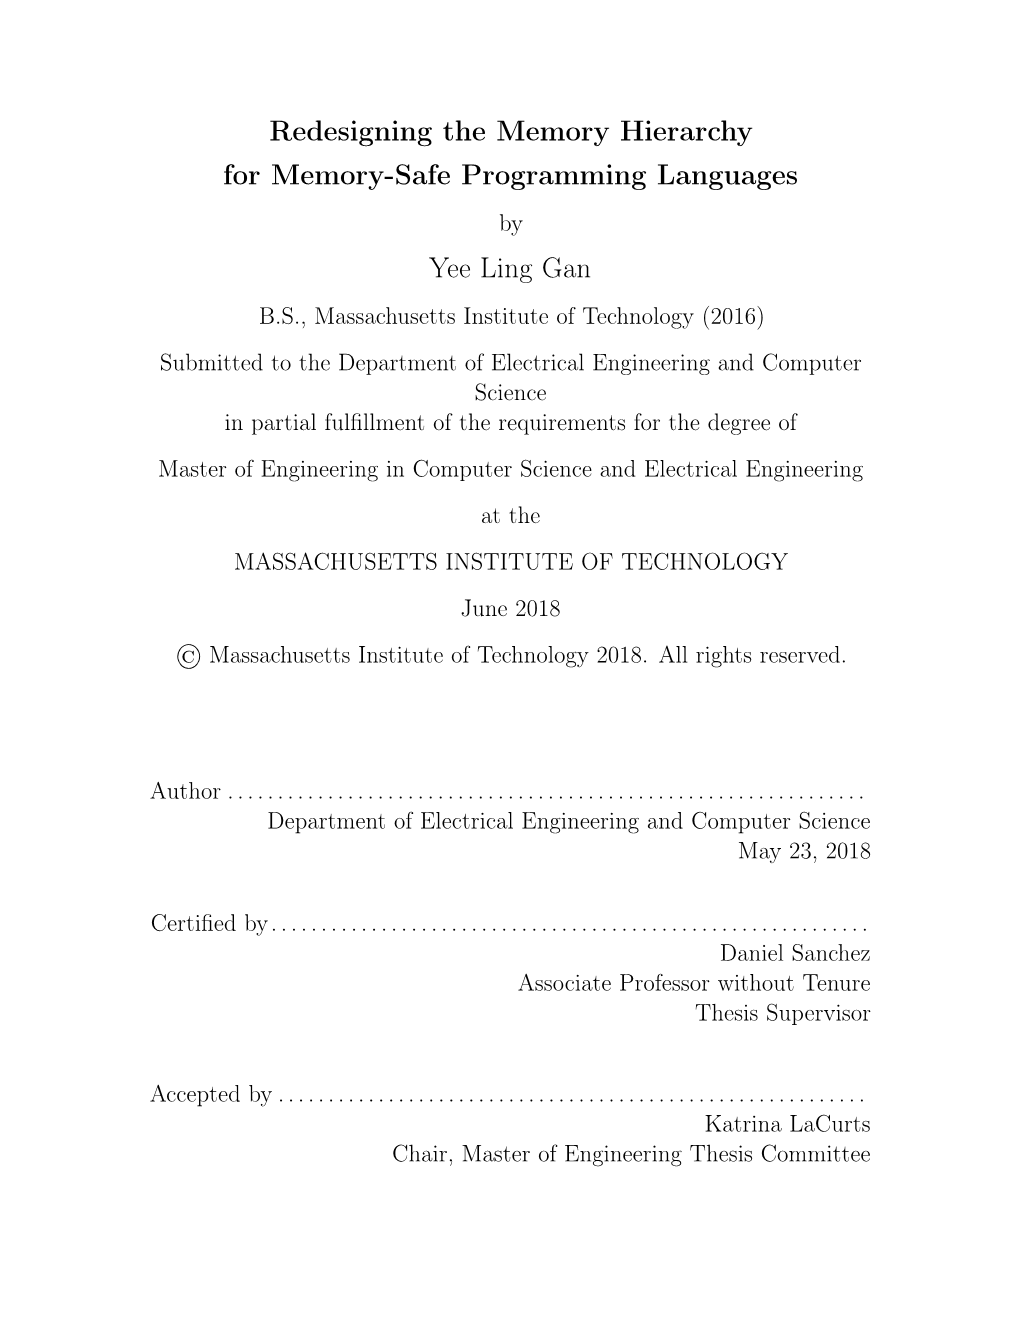 Redesigning the Memory Hierarchy for Memory-Safe Programming Languages